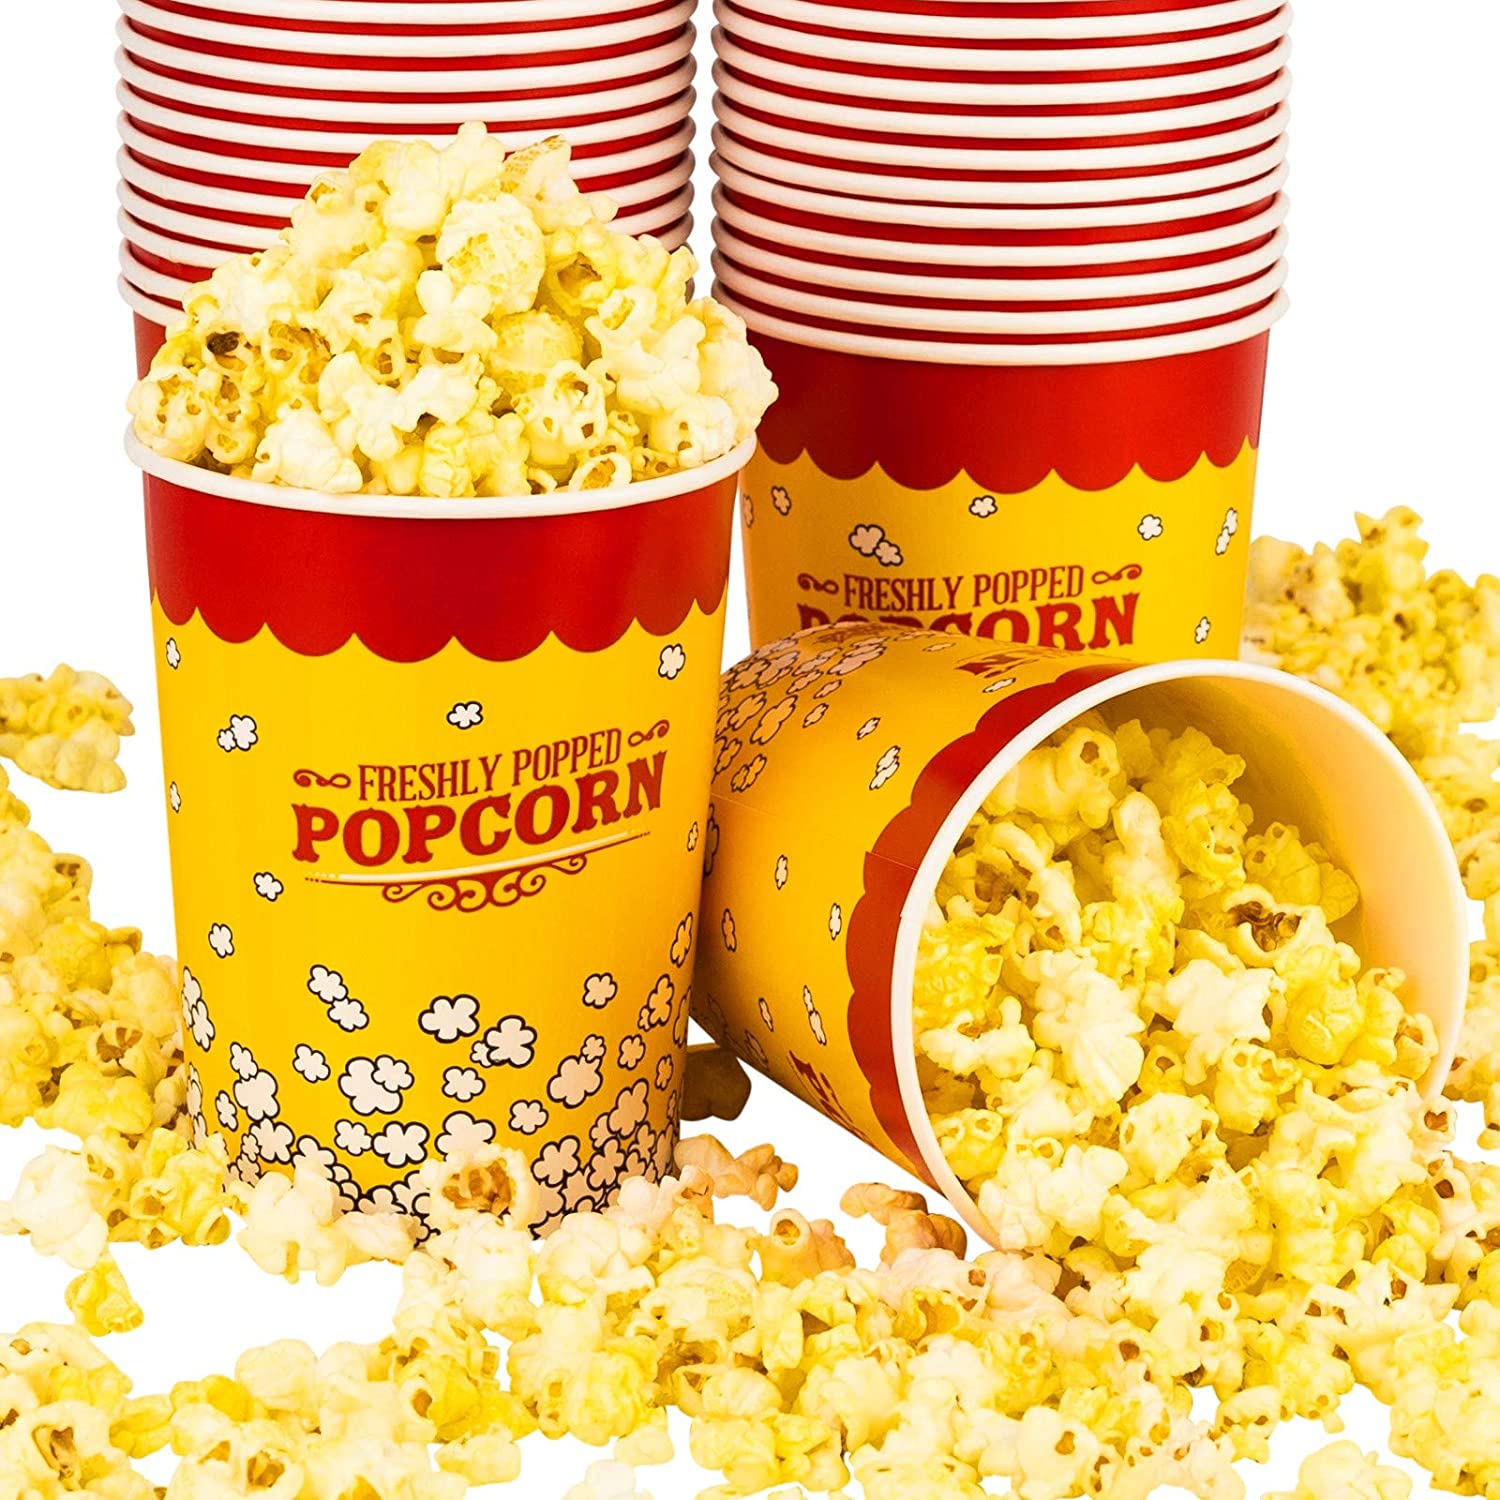 Large 32oz Paper Popcorn Buckets (25 Count) Disposable Vintage Container by Stock Your Home - image 1 of 7